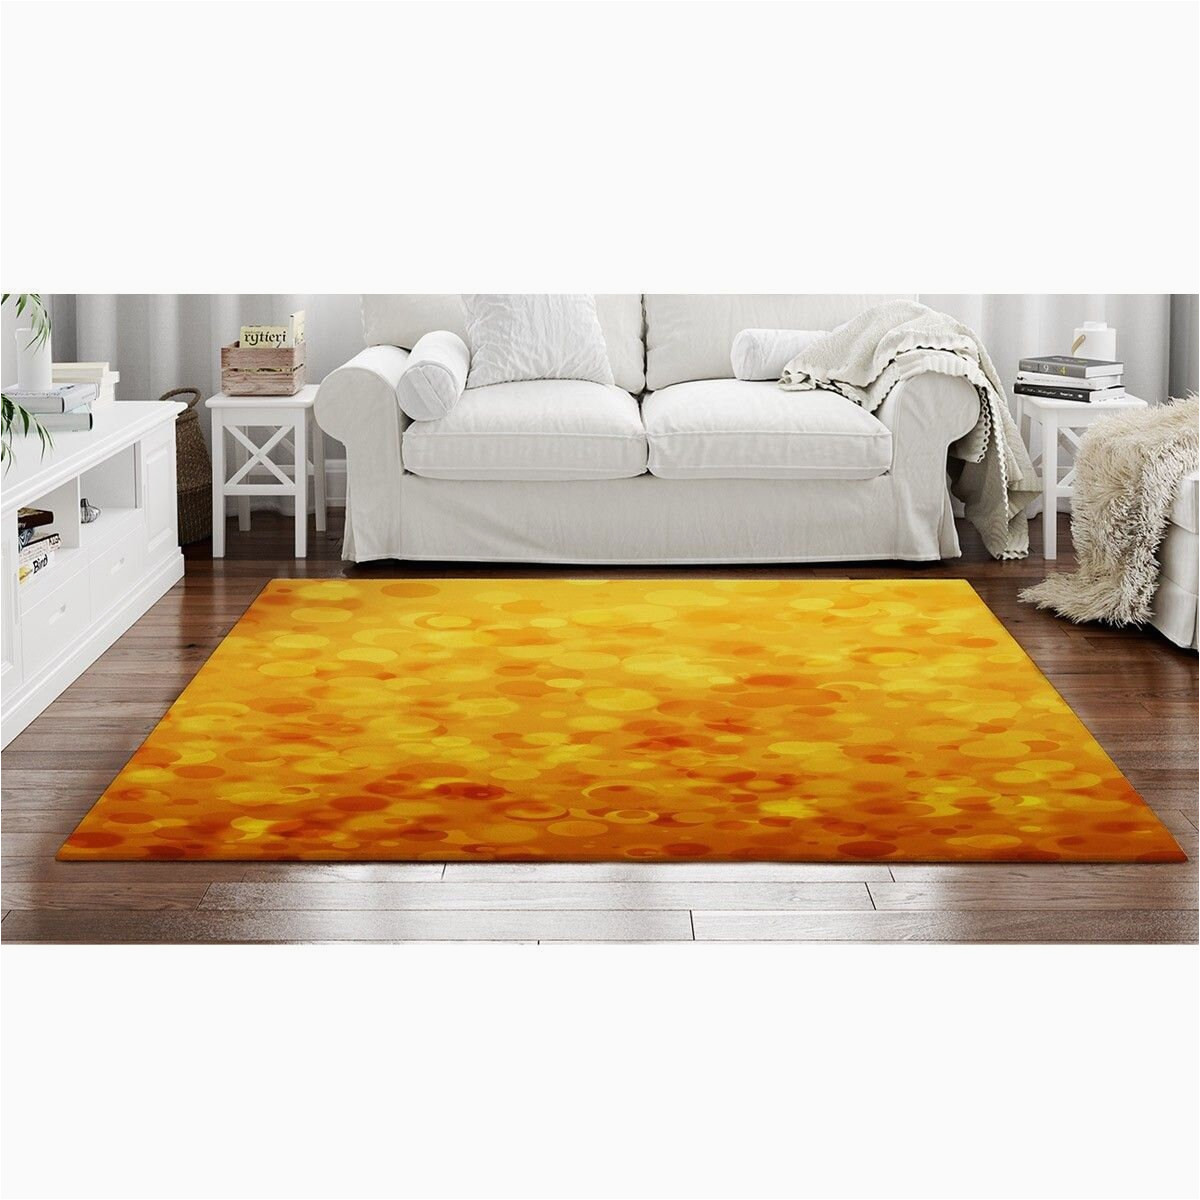 Large area Rugs Cheap Near Me Big Spots In orange Shades Rug Geometrical Circles area Rugs – Etsy.de